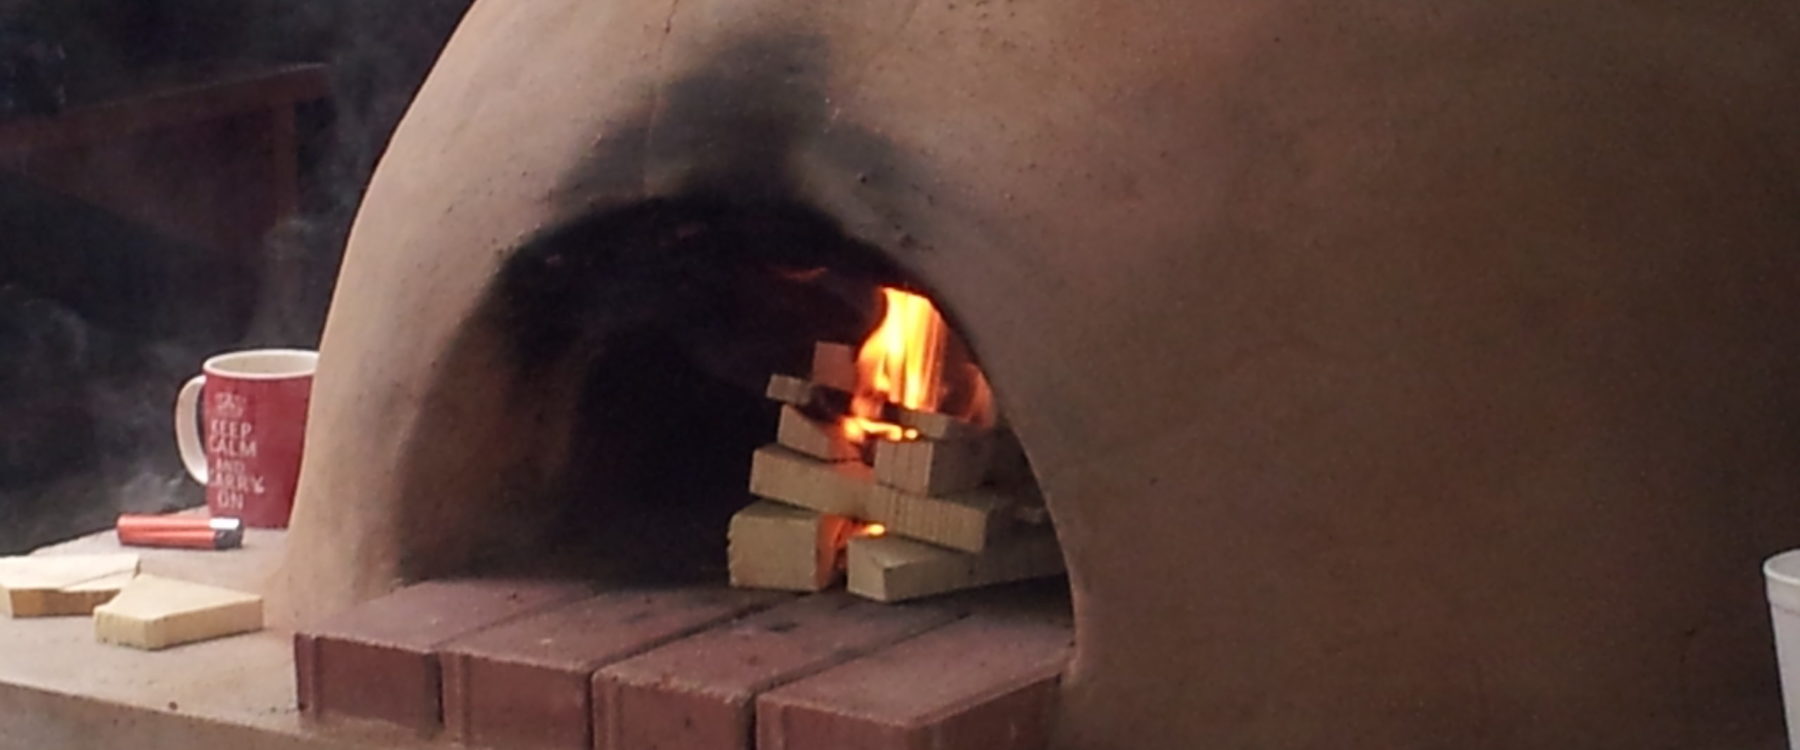 Build your own pizza oven